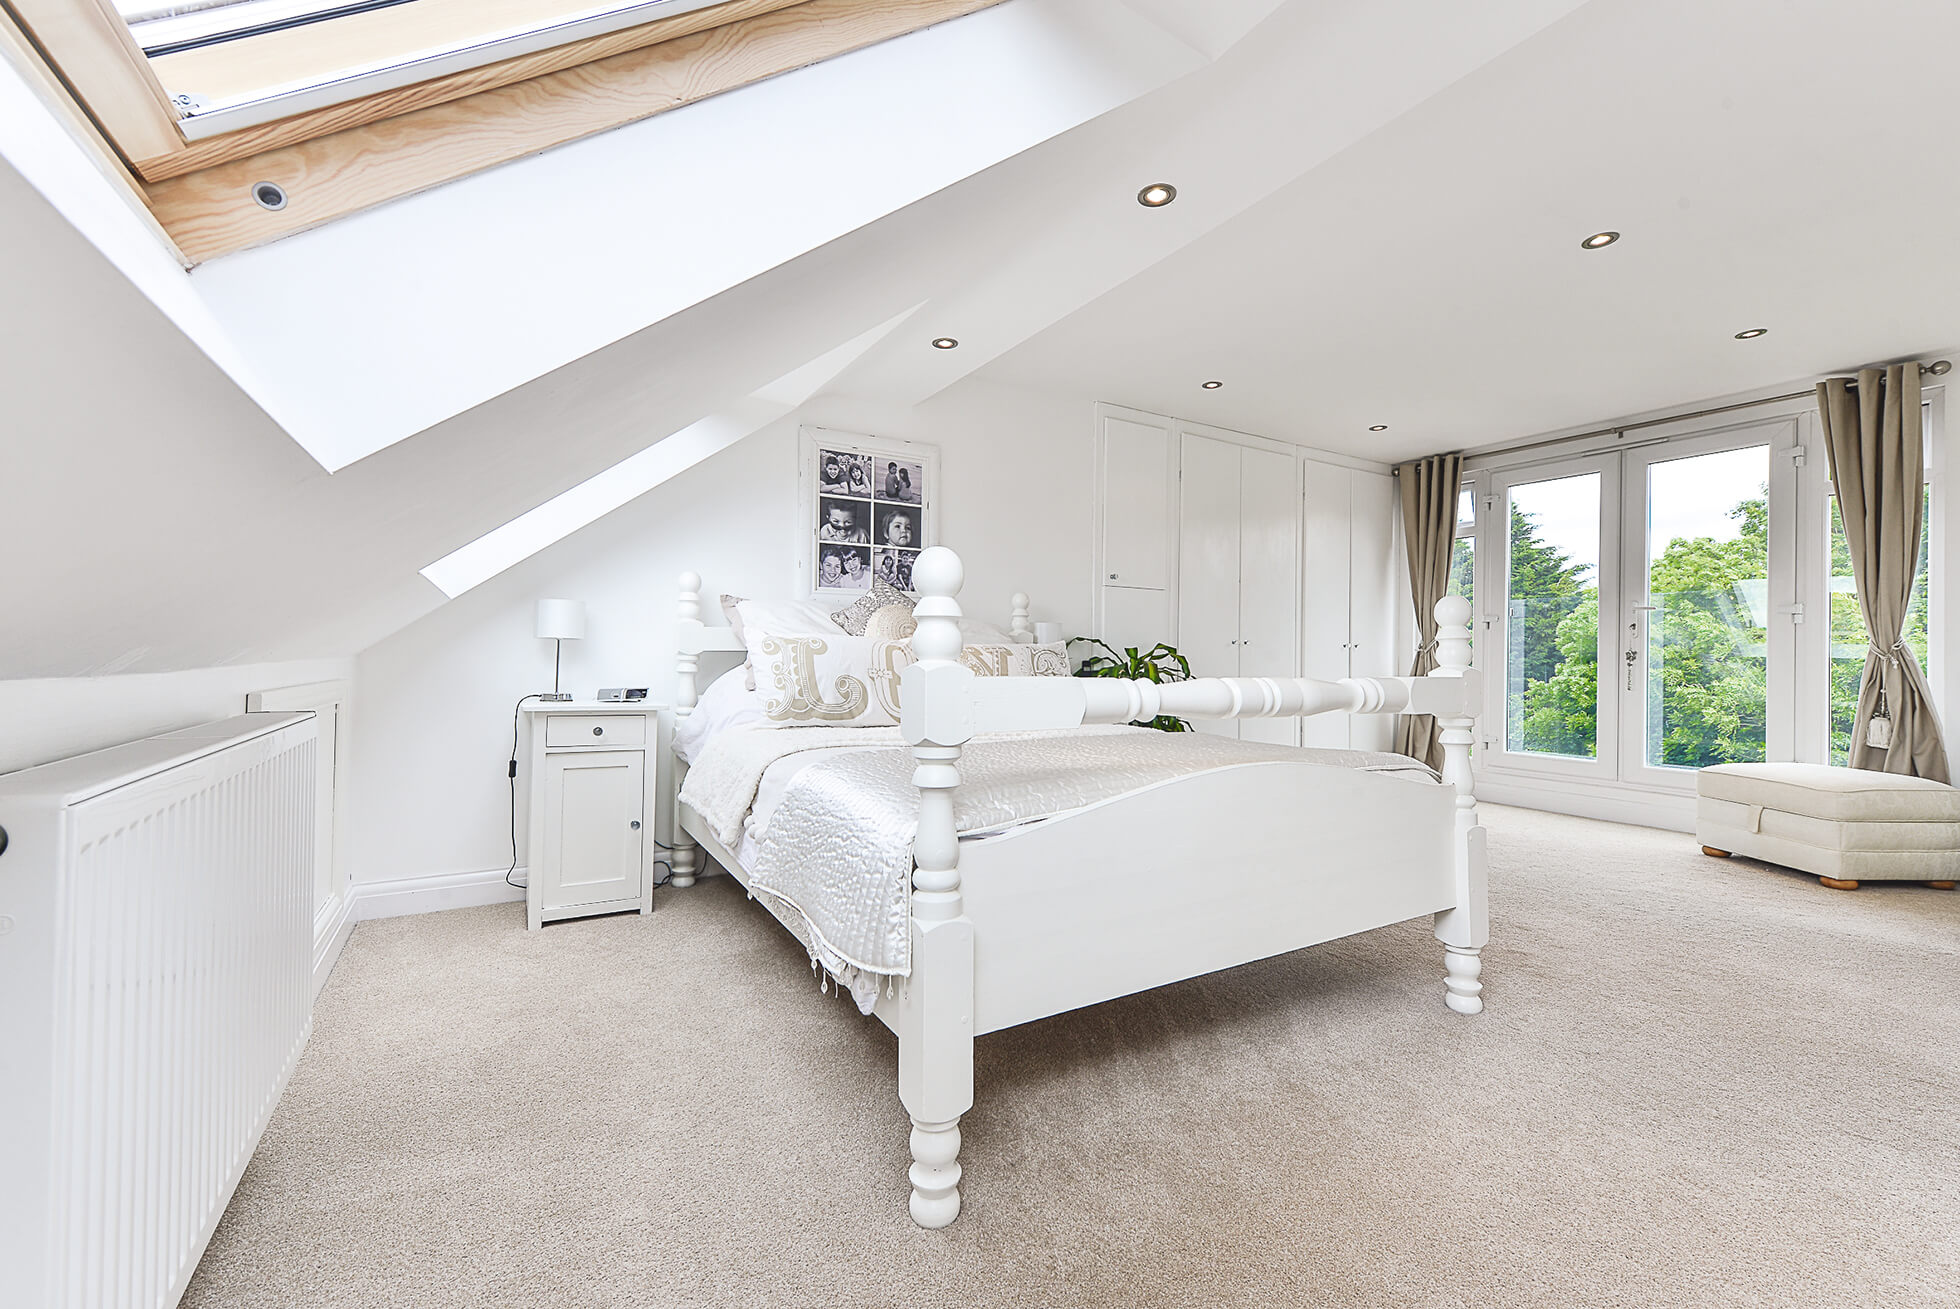 Do you have a question about converting your Loft in Lemsford? Here are the most popular questions asked by our clients.